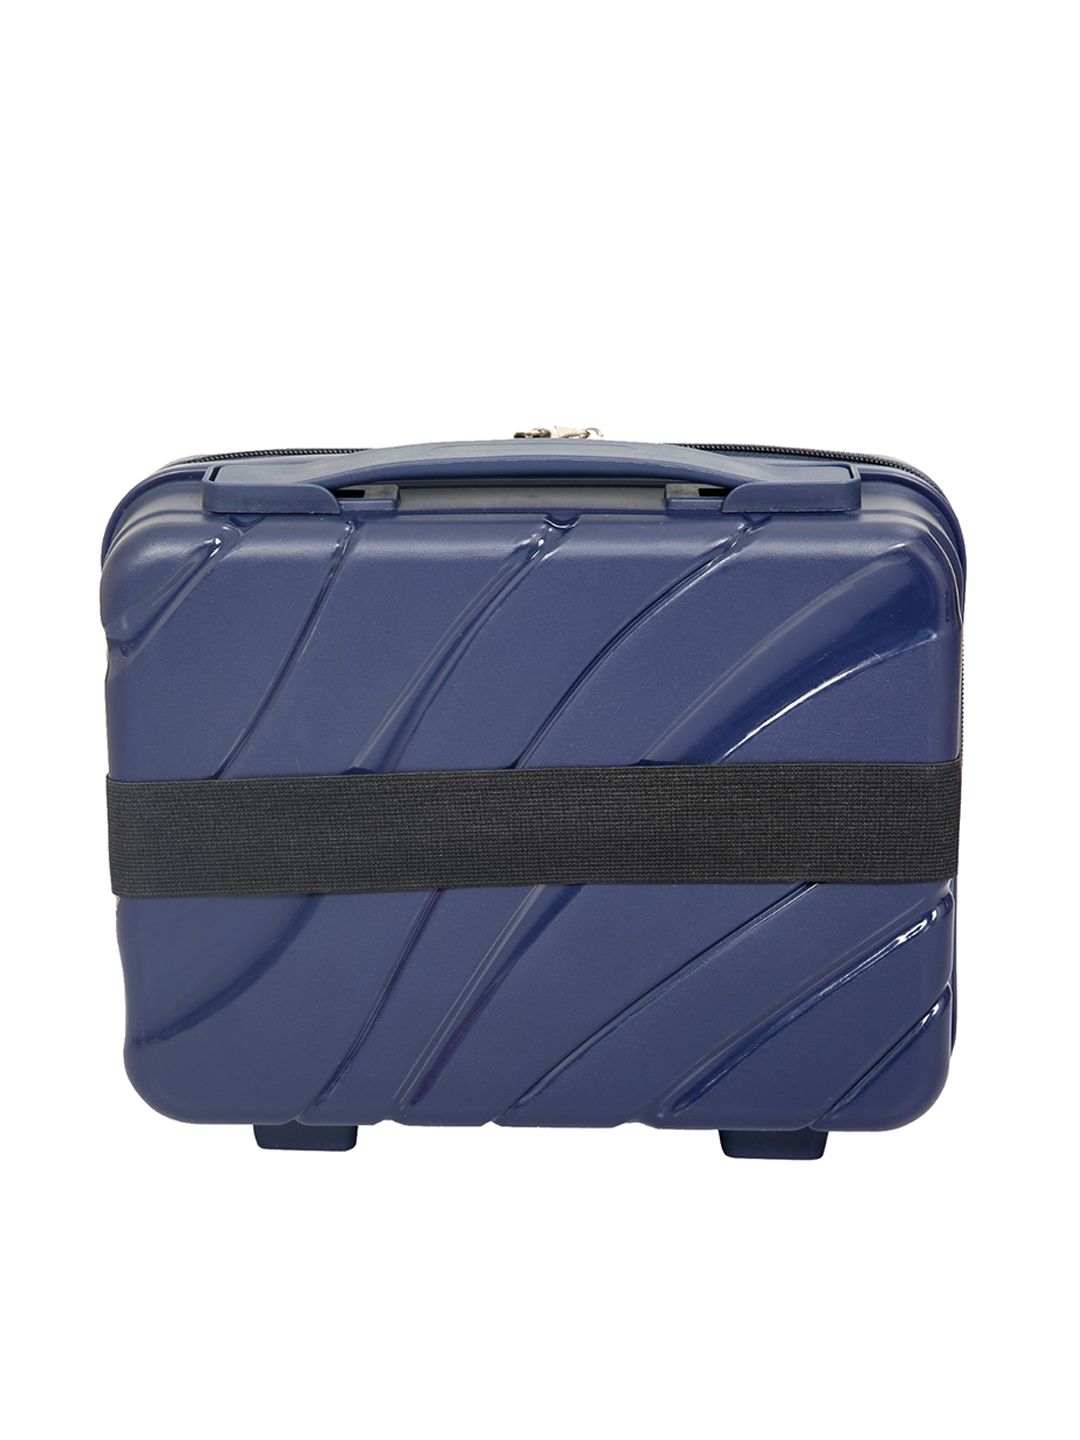 Polo Class Blue Vanity Bag Price in India